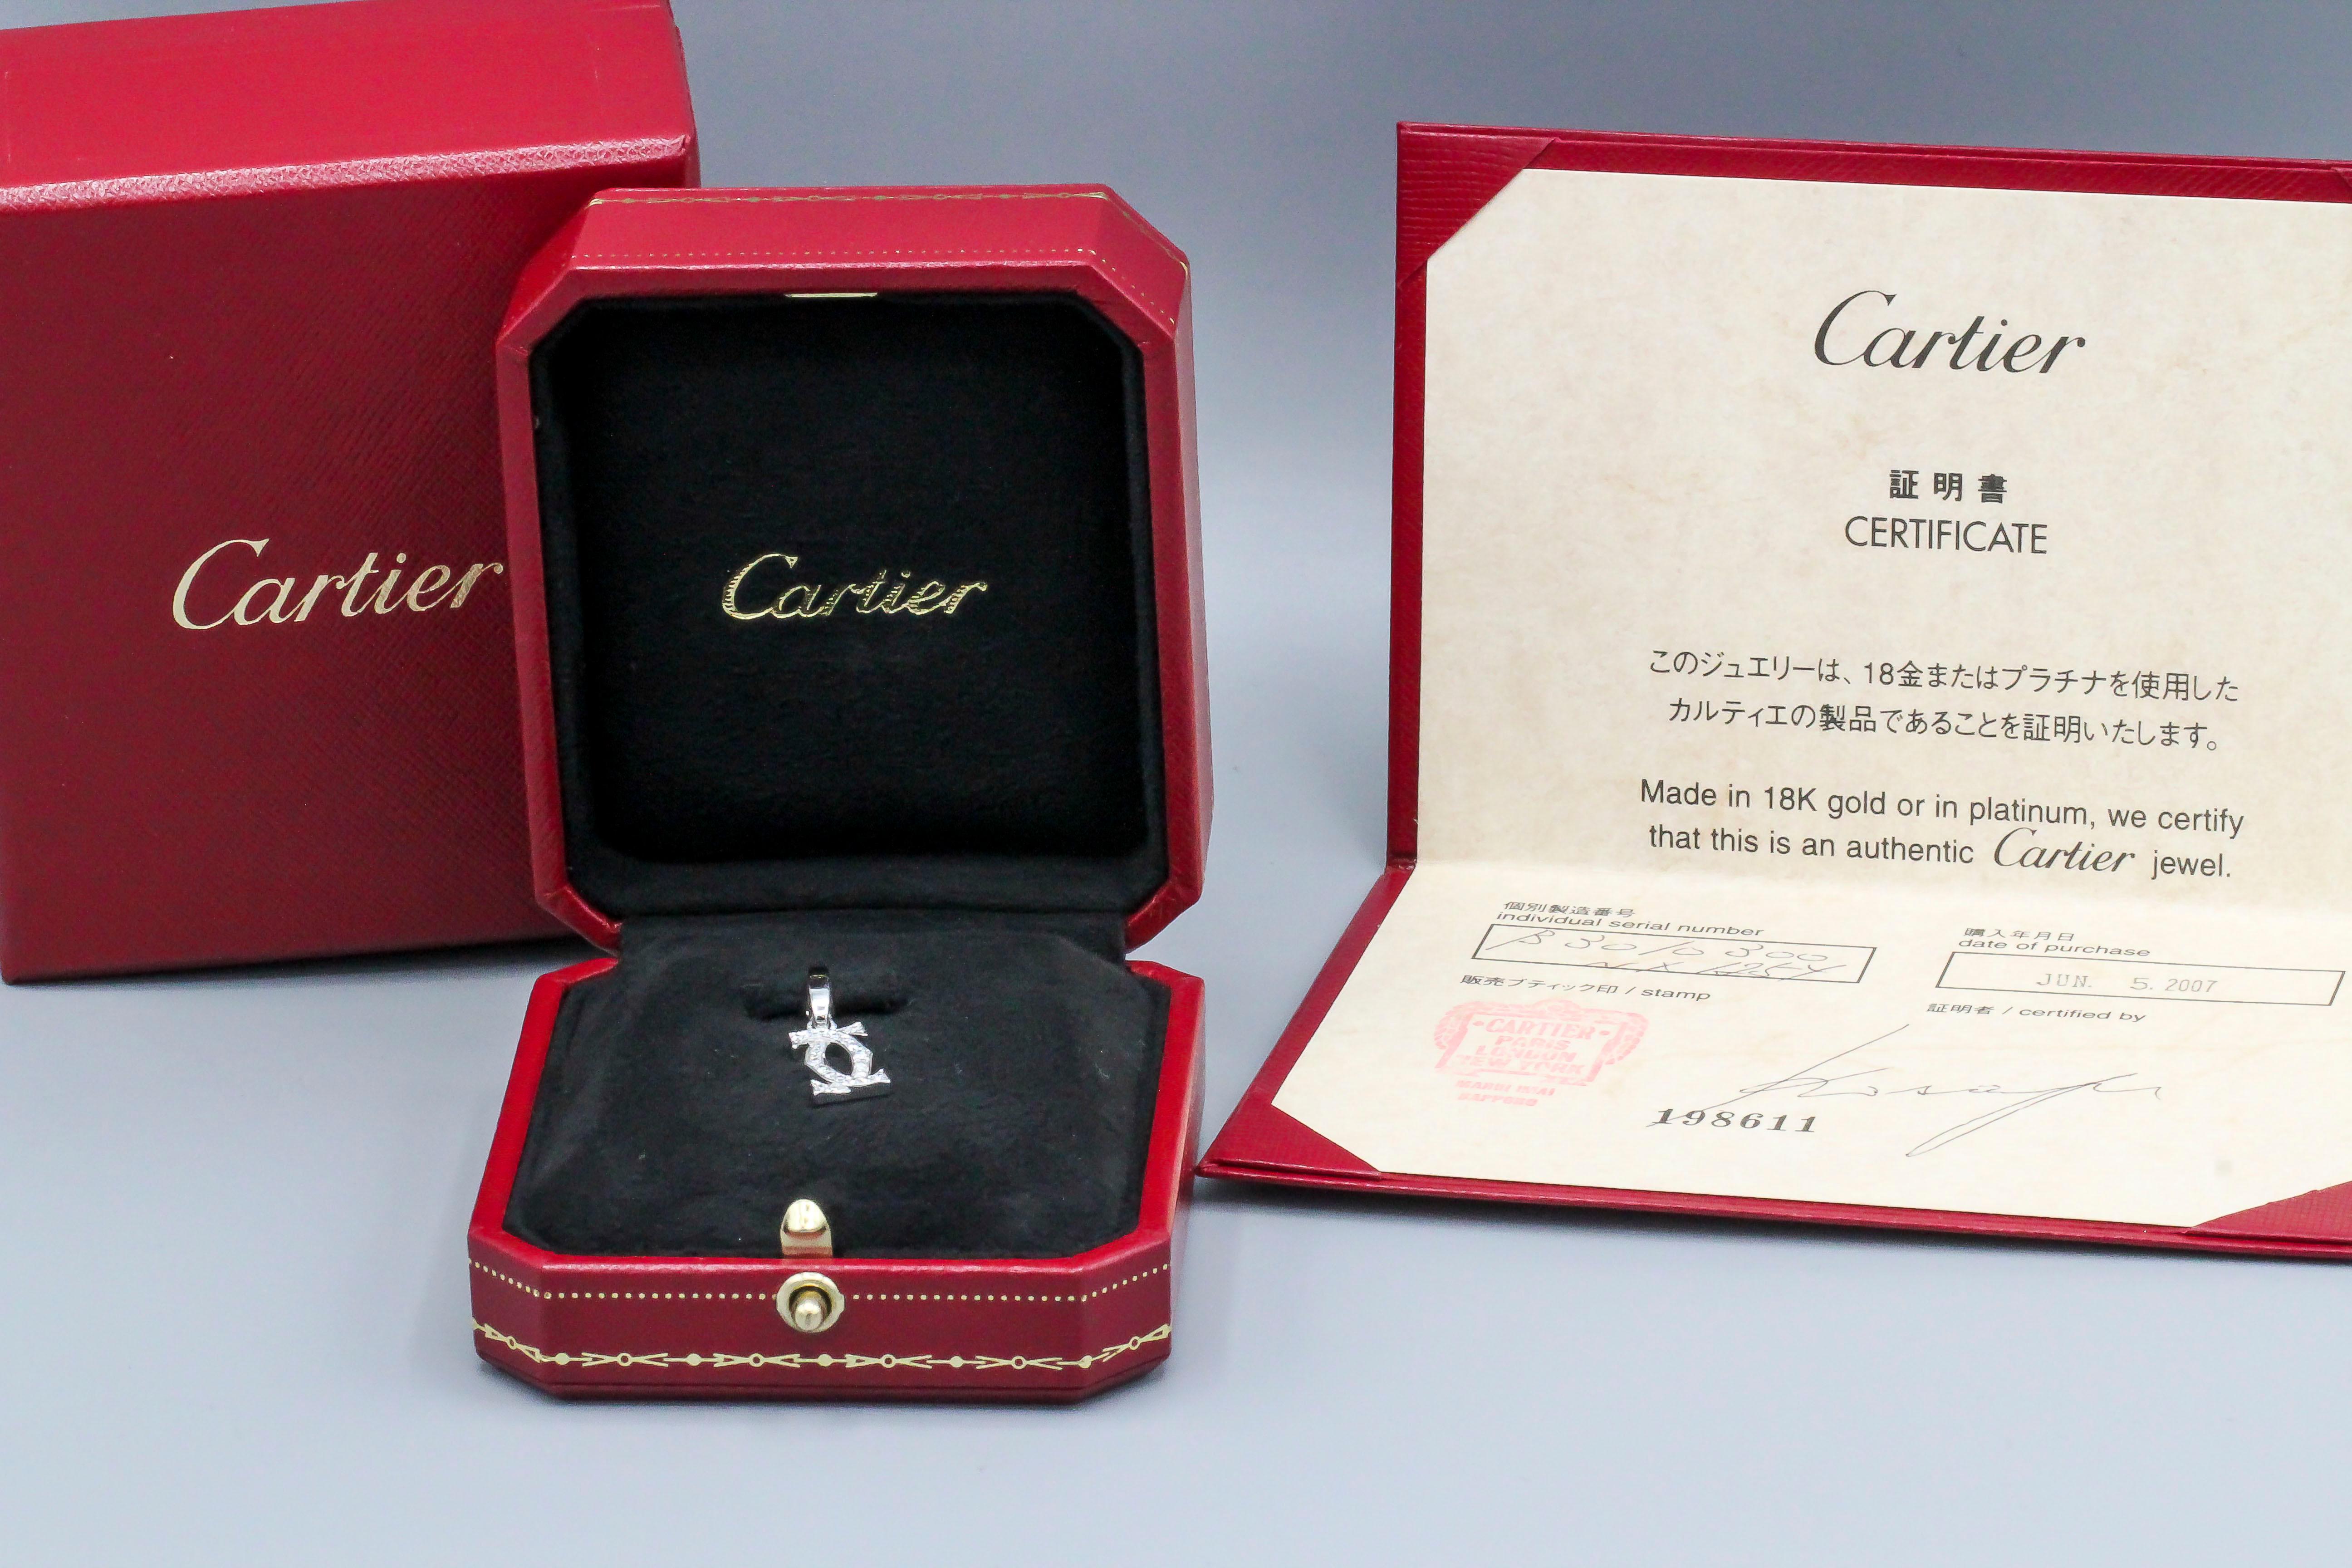 Fine diamond and 18K white gold charm by Cartier.  Designed as the interlocking double C Cartier logo, featuring high grade round brilliant cut diamonds.  Well made and easy to add to any bracelet or pendant.  With certificate of authenticity and